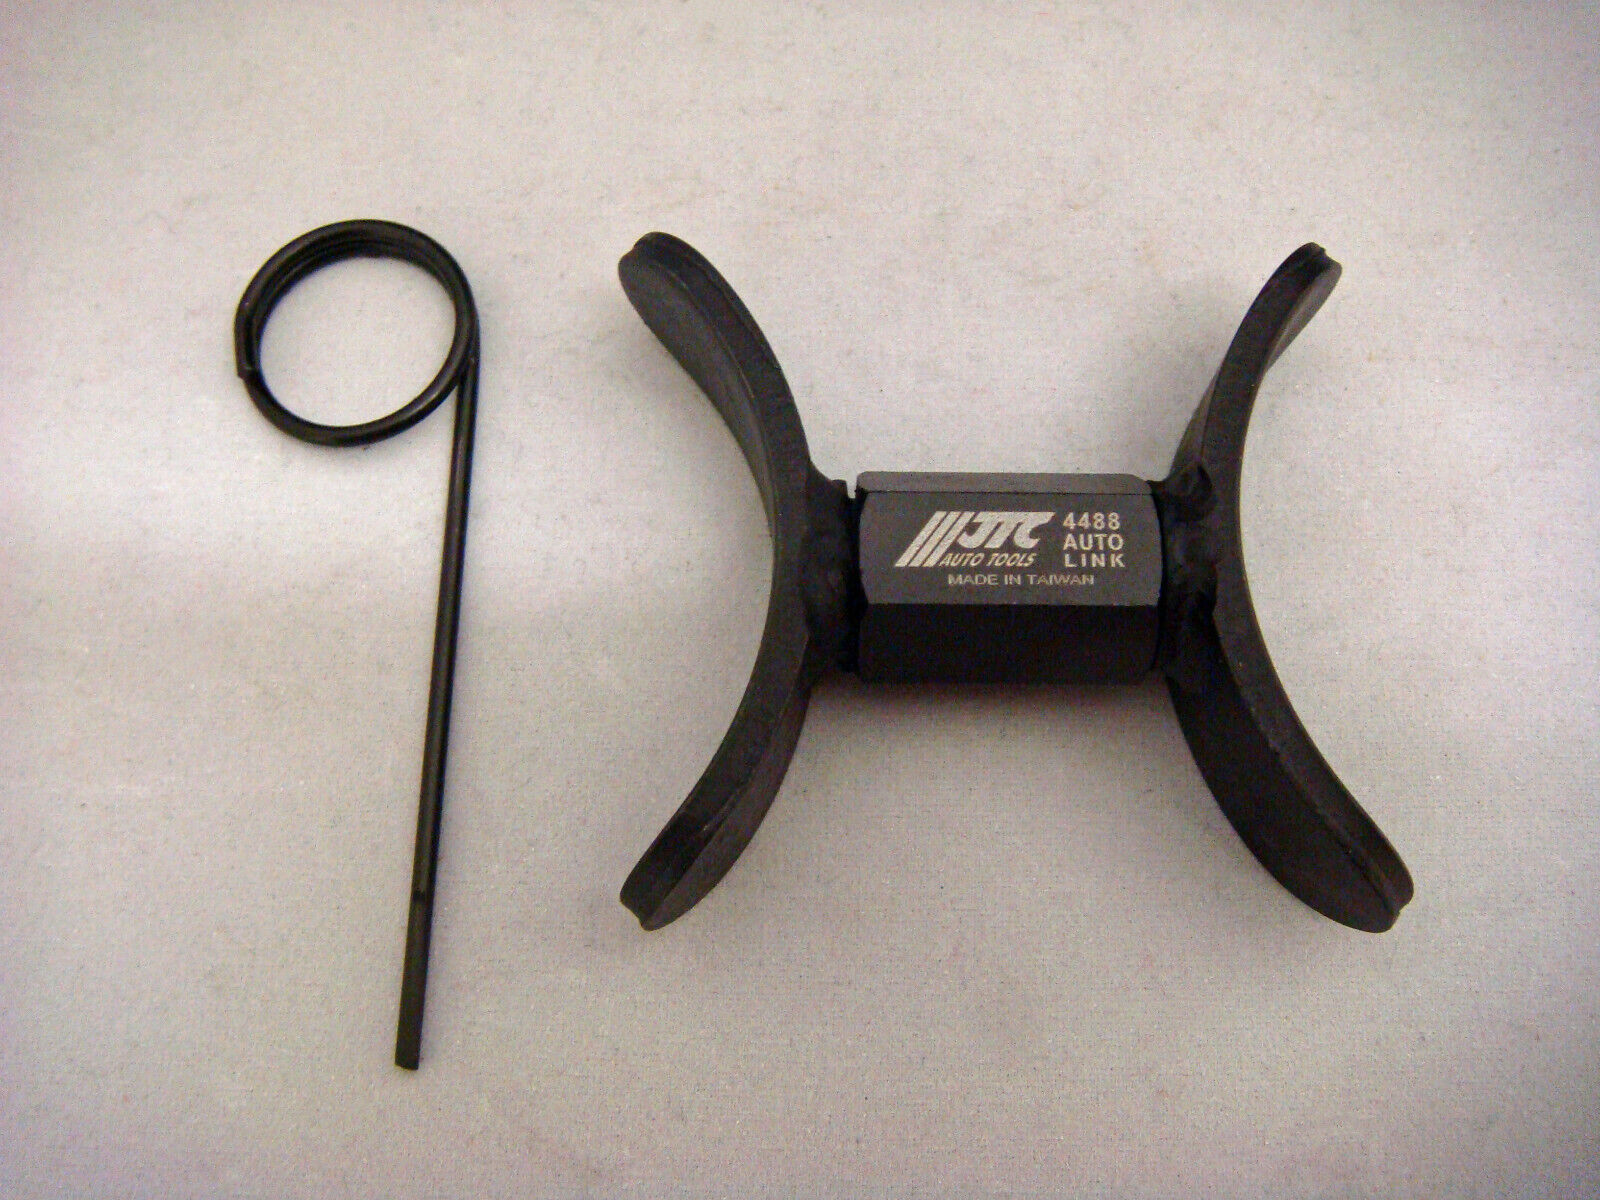 JTC-4488 TOYOTA TIMING BELT TENSIONER TOOL TOYOTA T-100, Tacoma, and 4-Runner...